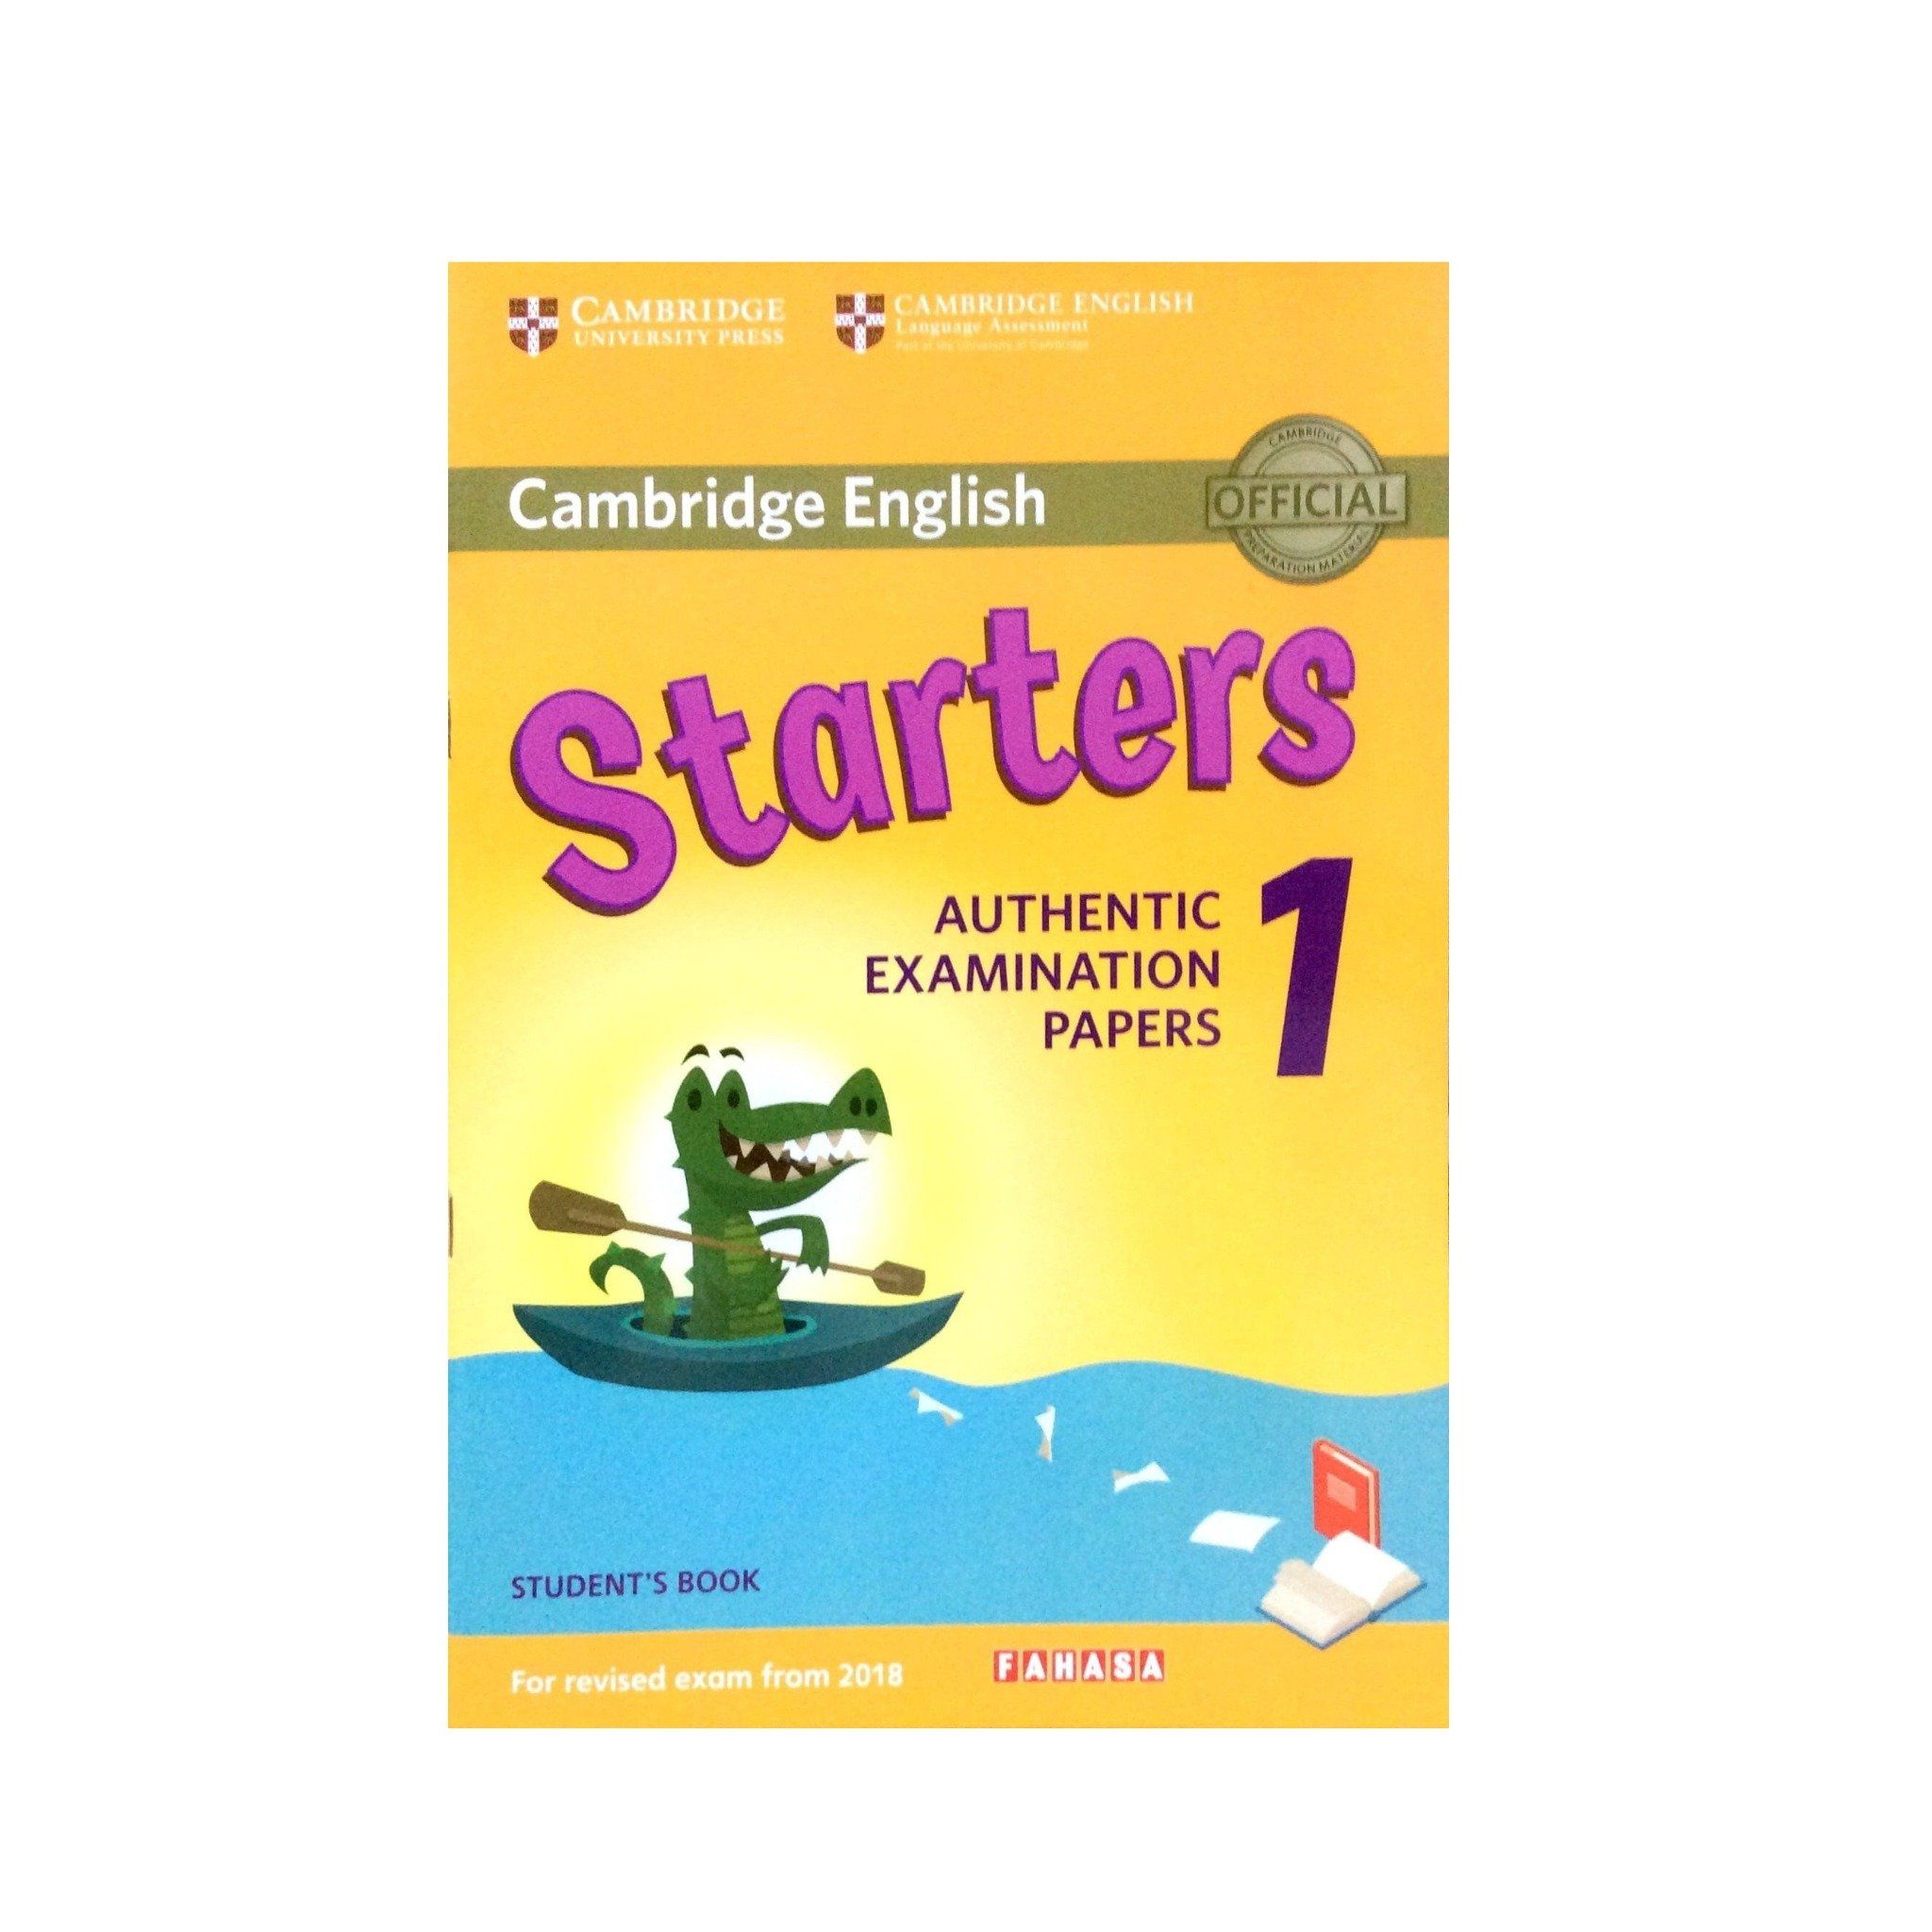  Cambridge English - Starters Authentic Examination Papers 1 - Student's Book 